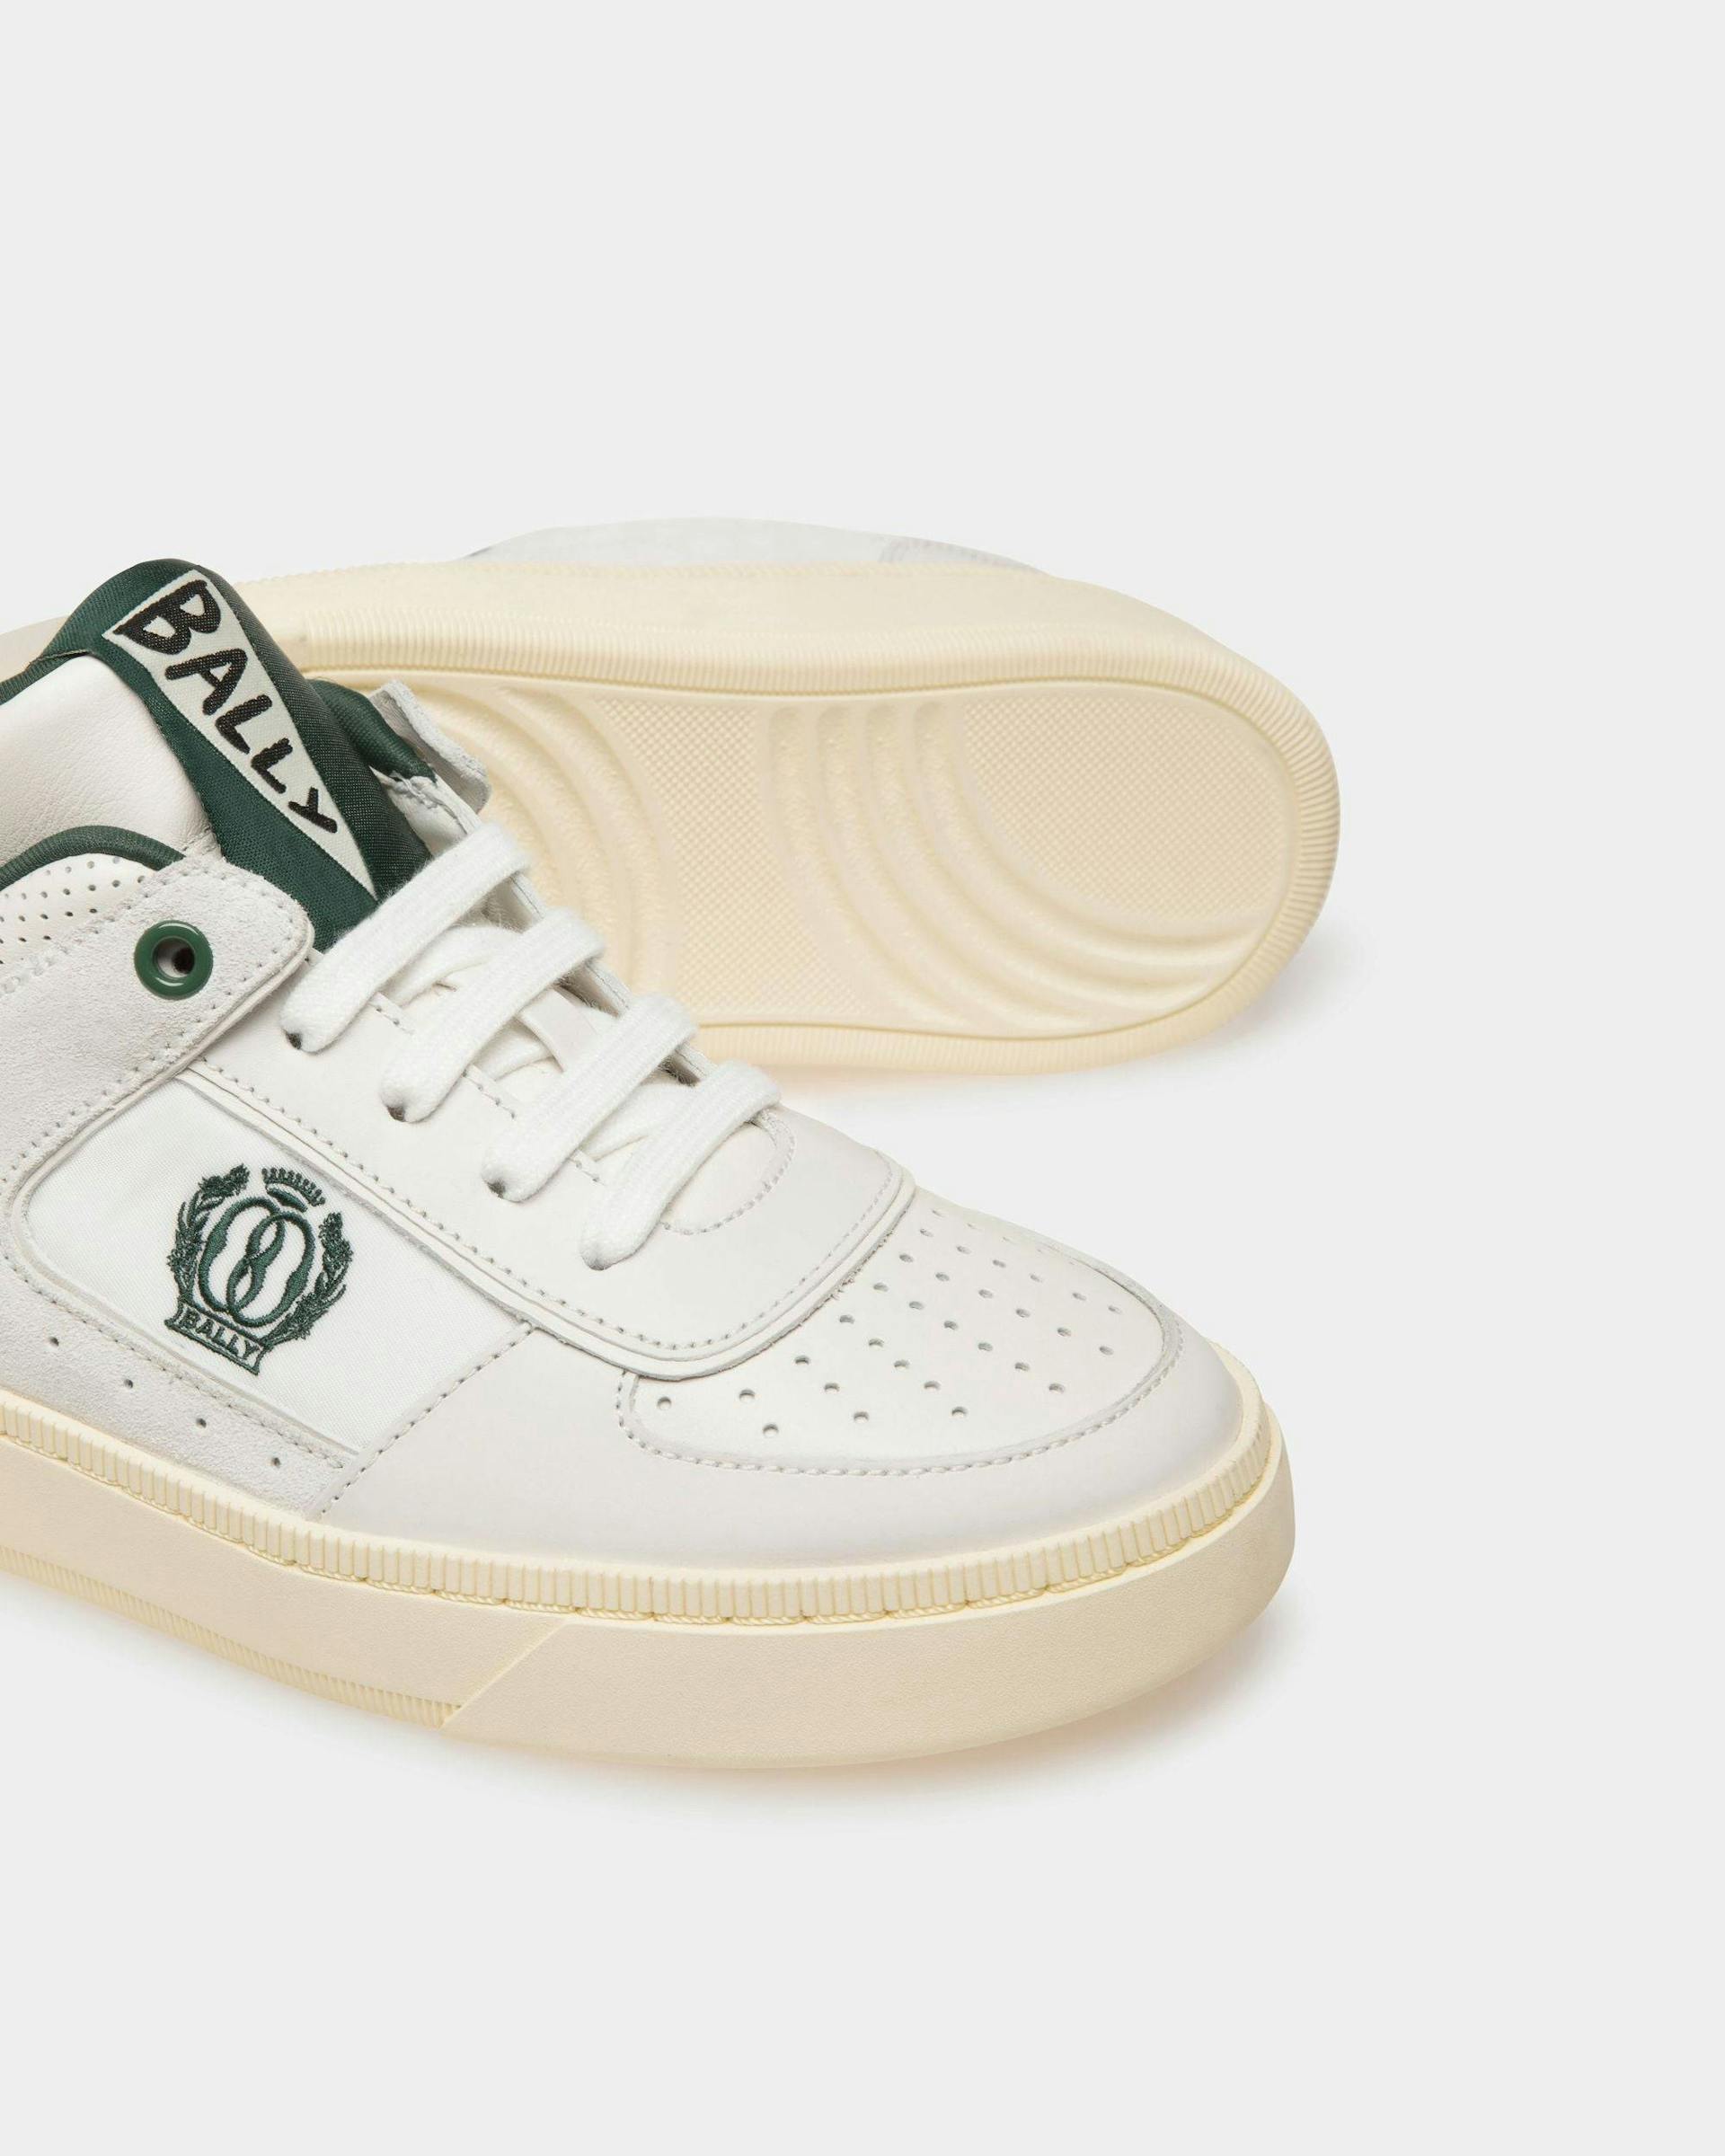 Raise Sneakers In White And Green Leather - Women's - Bally - 04